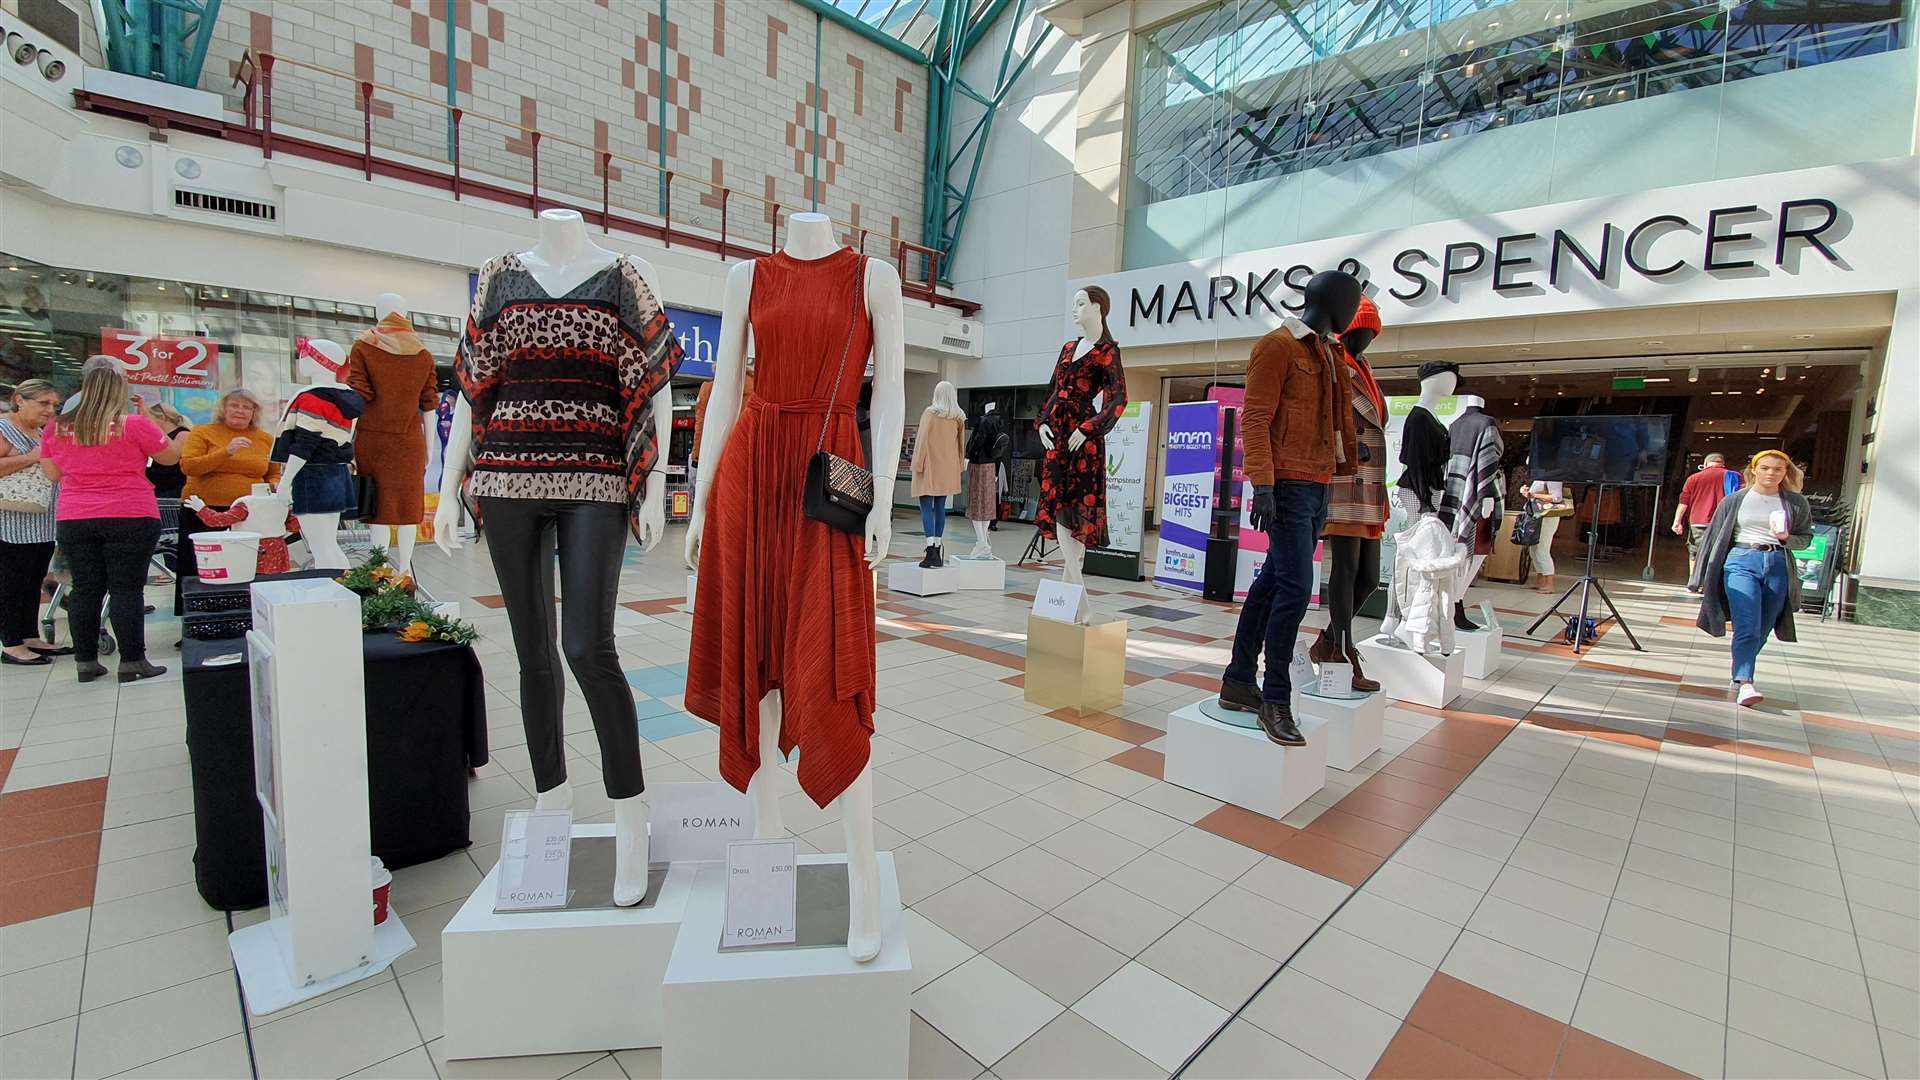 On Saturday kmfm are hosting a fashion event at Hempstead Valley Shopping Centre (17679719)